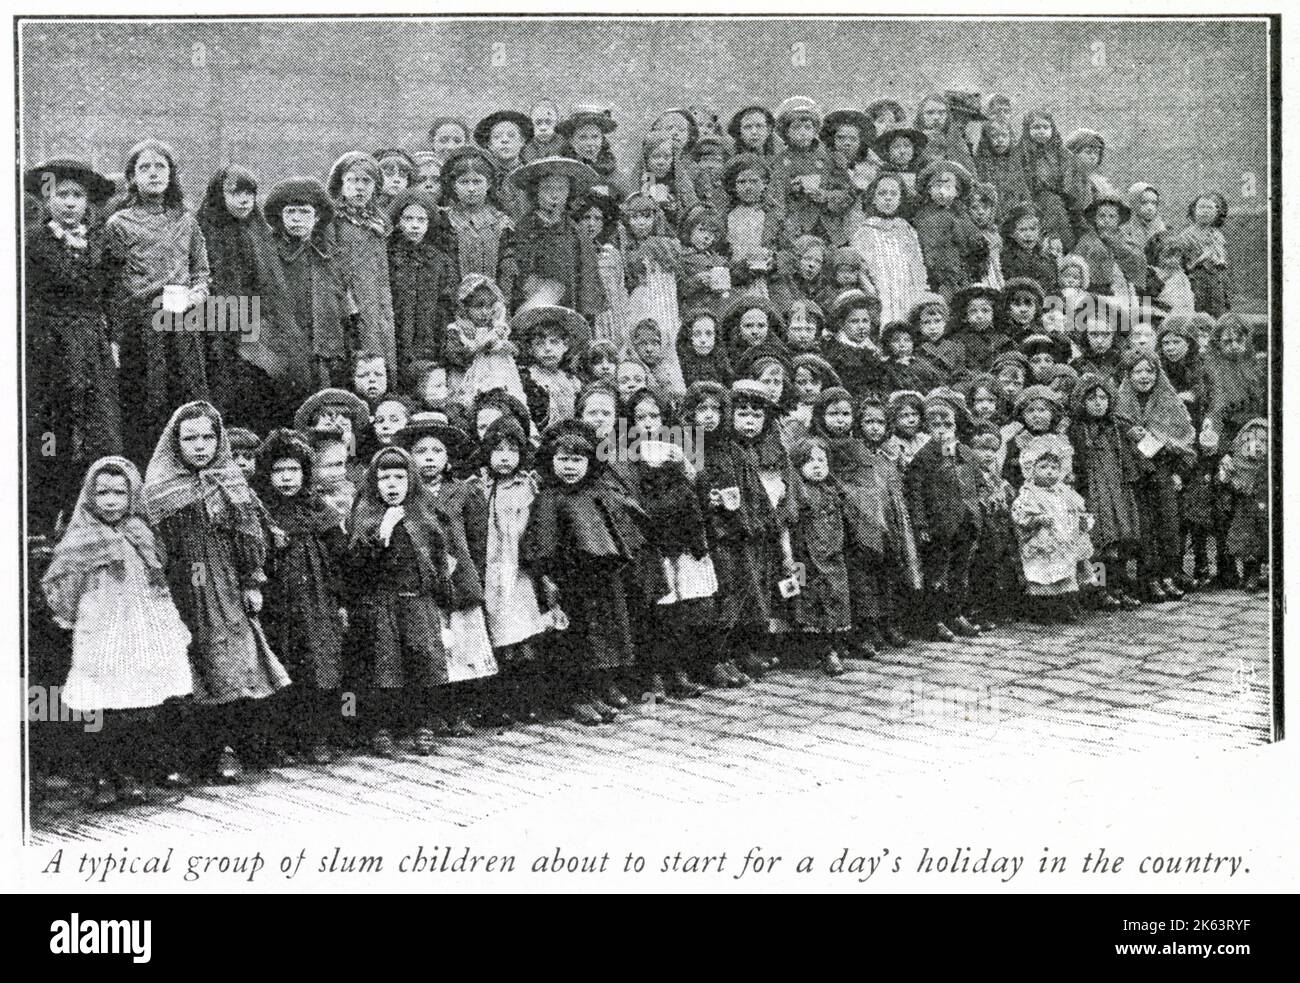 A large group of slum children from London about to go on a day trip to the countryside thank to the christian charity, Salvation Army.     Date: 1904 Stock Photo